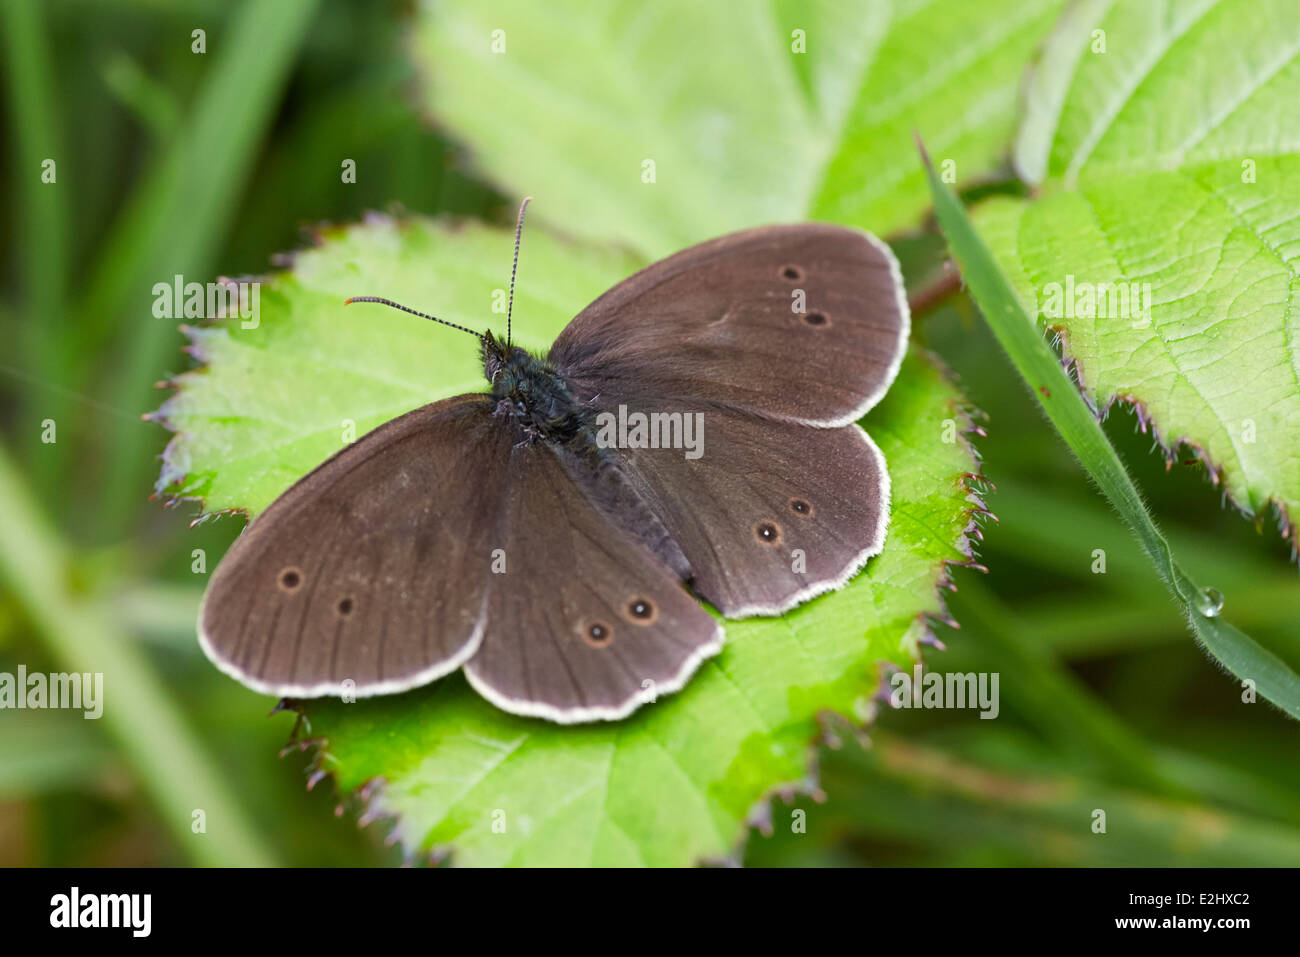 Ringlet butterfly. Bookham commun, Surrey, Angleterre. Banque D'Images